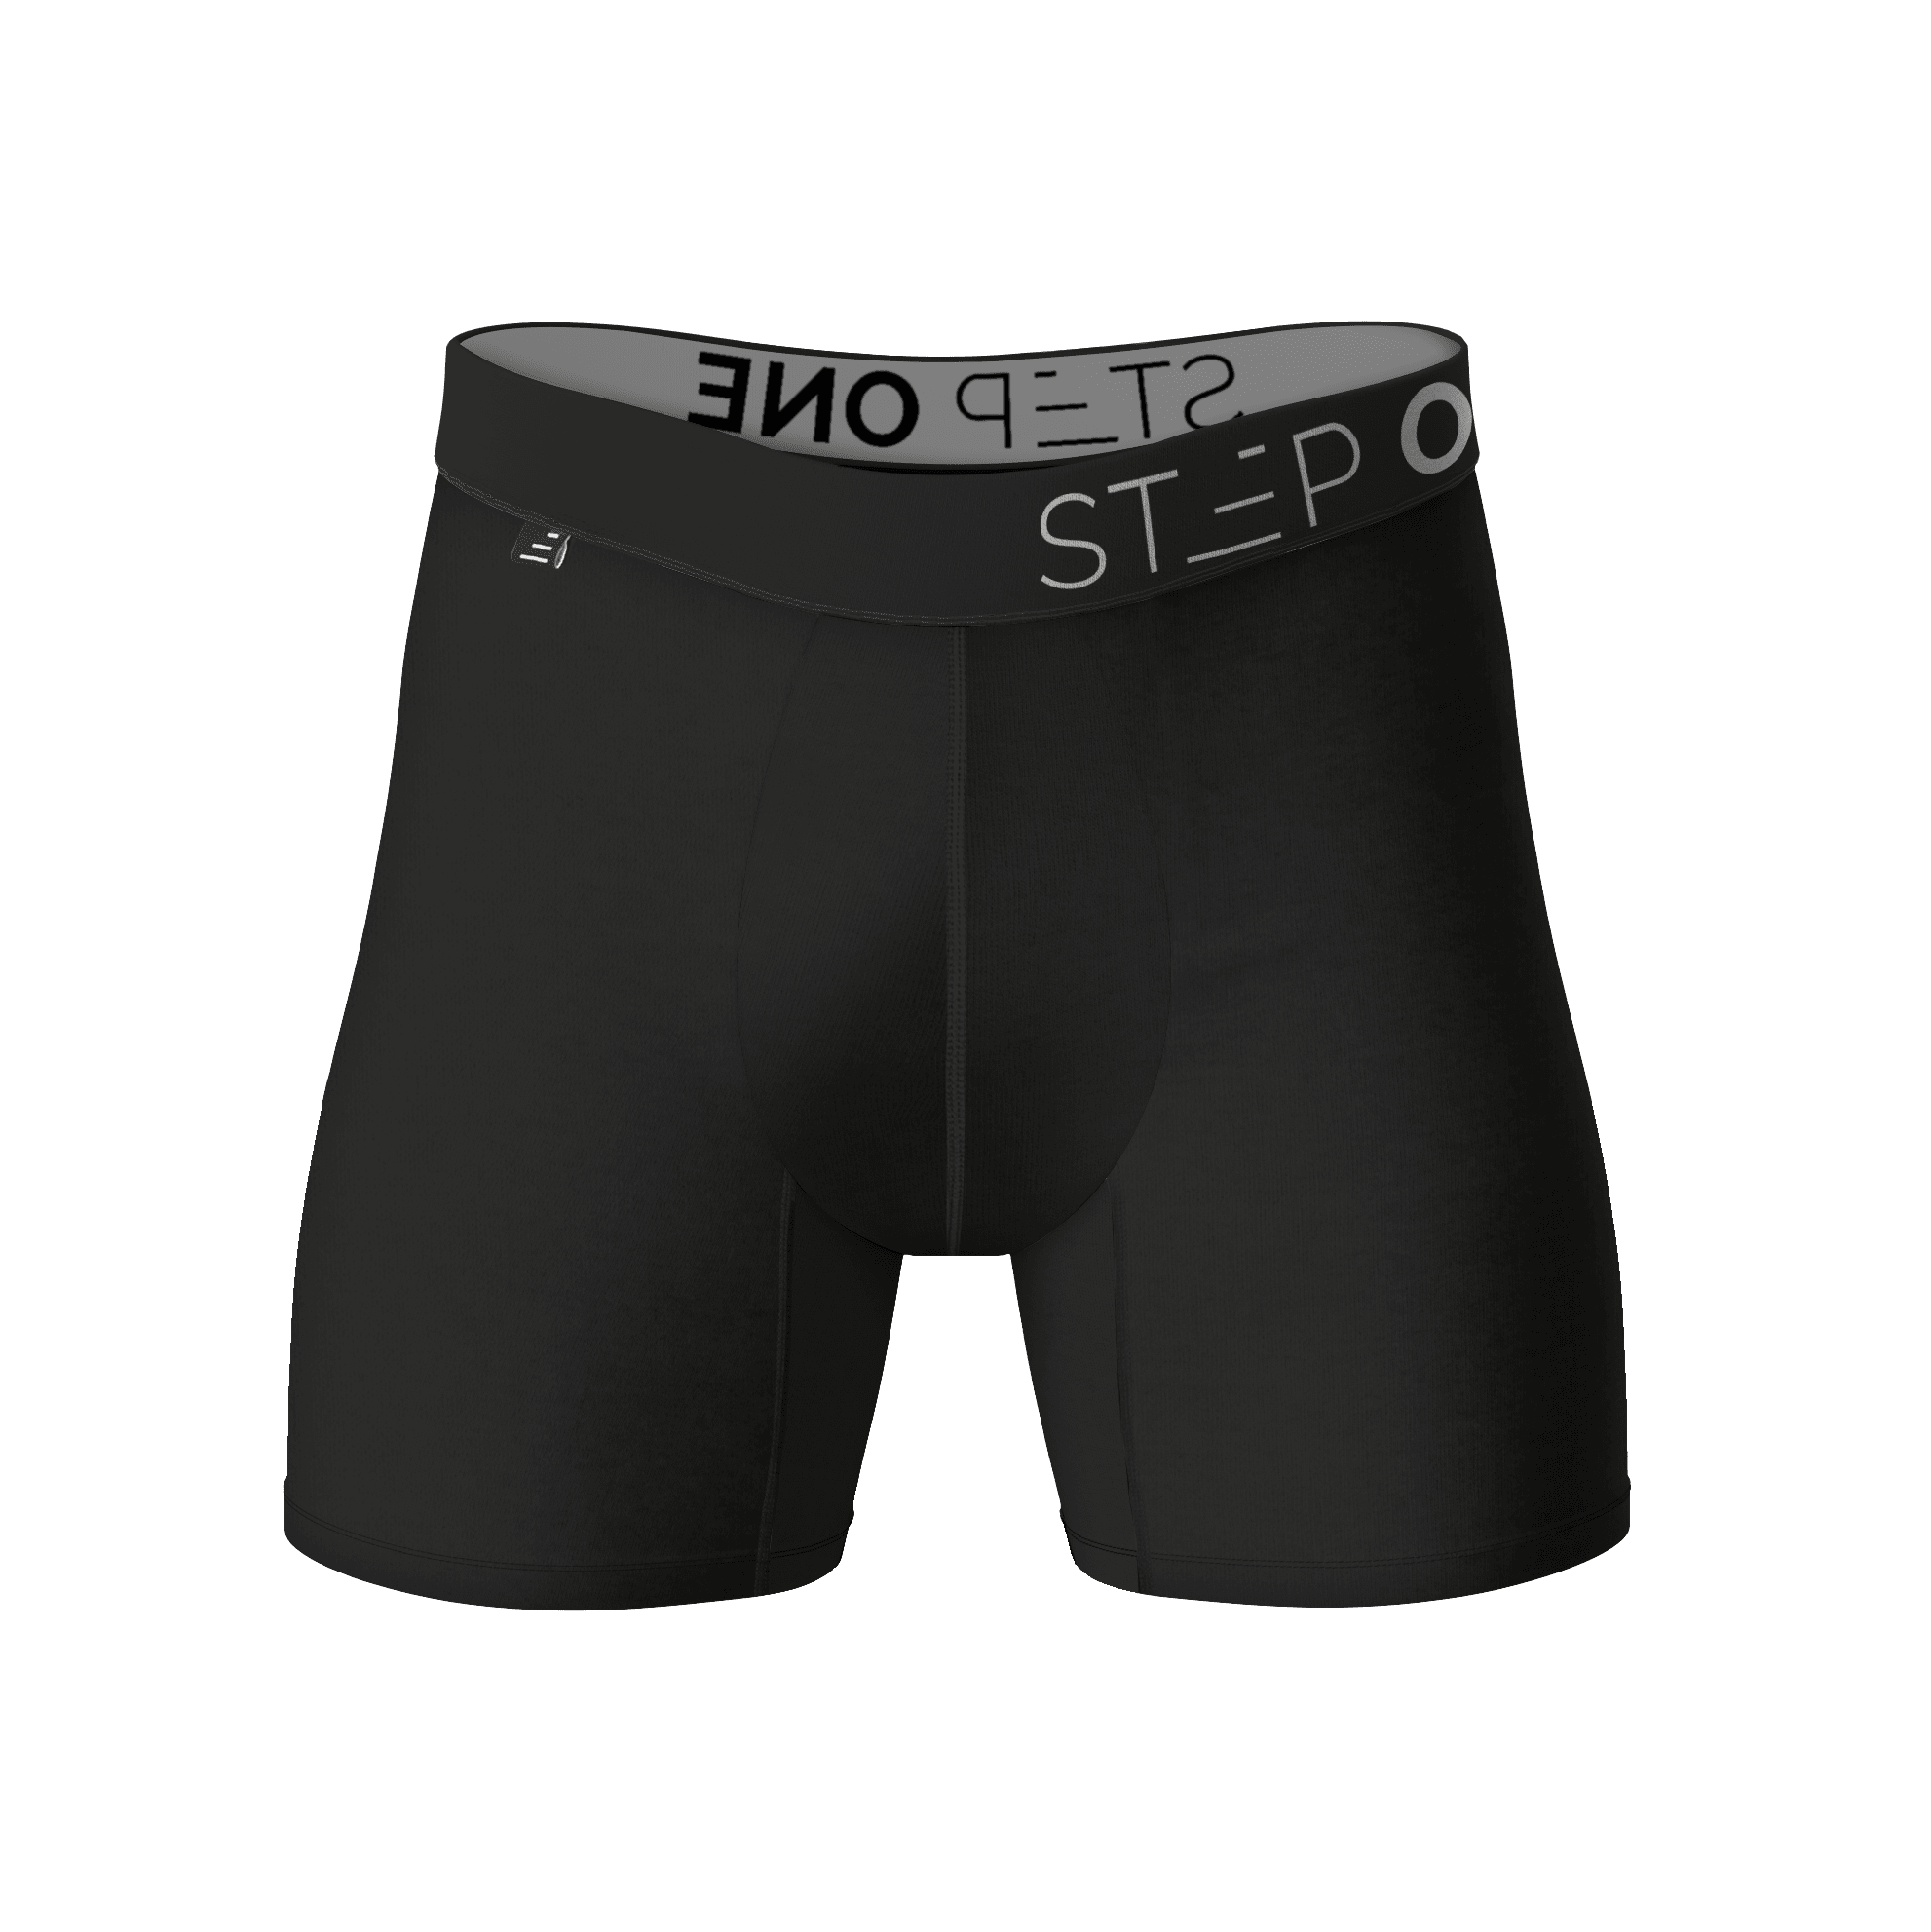 BRADY Men's Boxer Brief 3 Pack, Multi at  Men's Clothing store